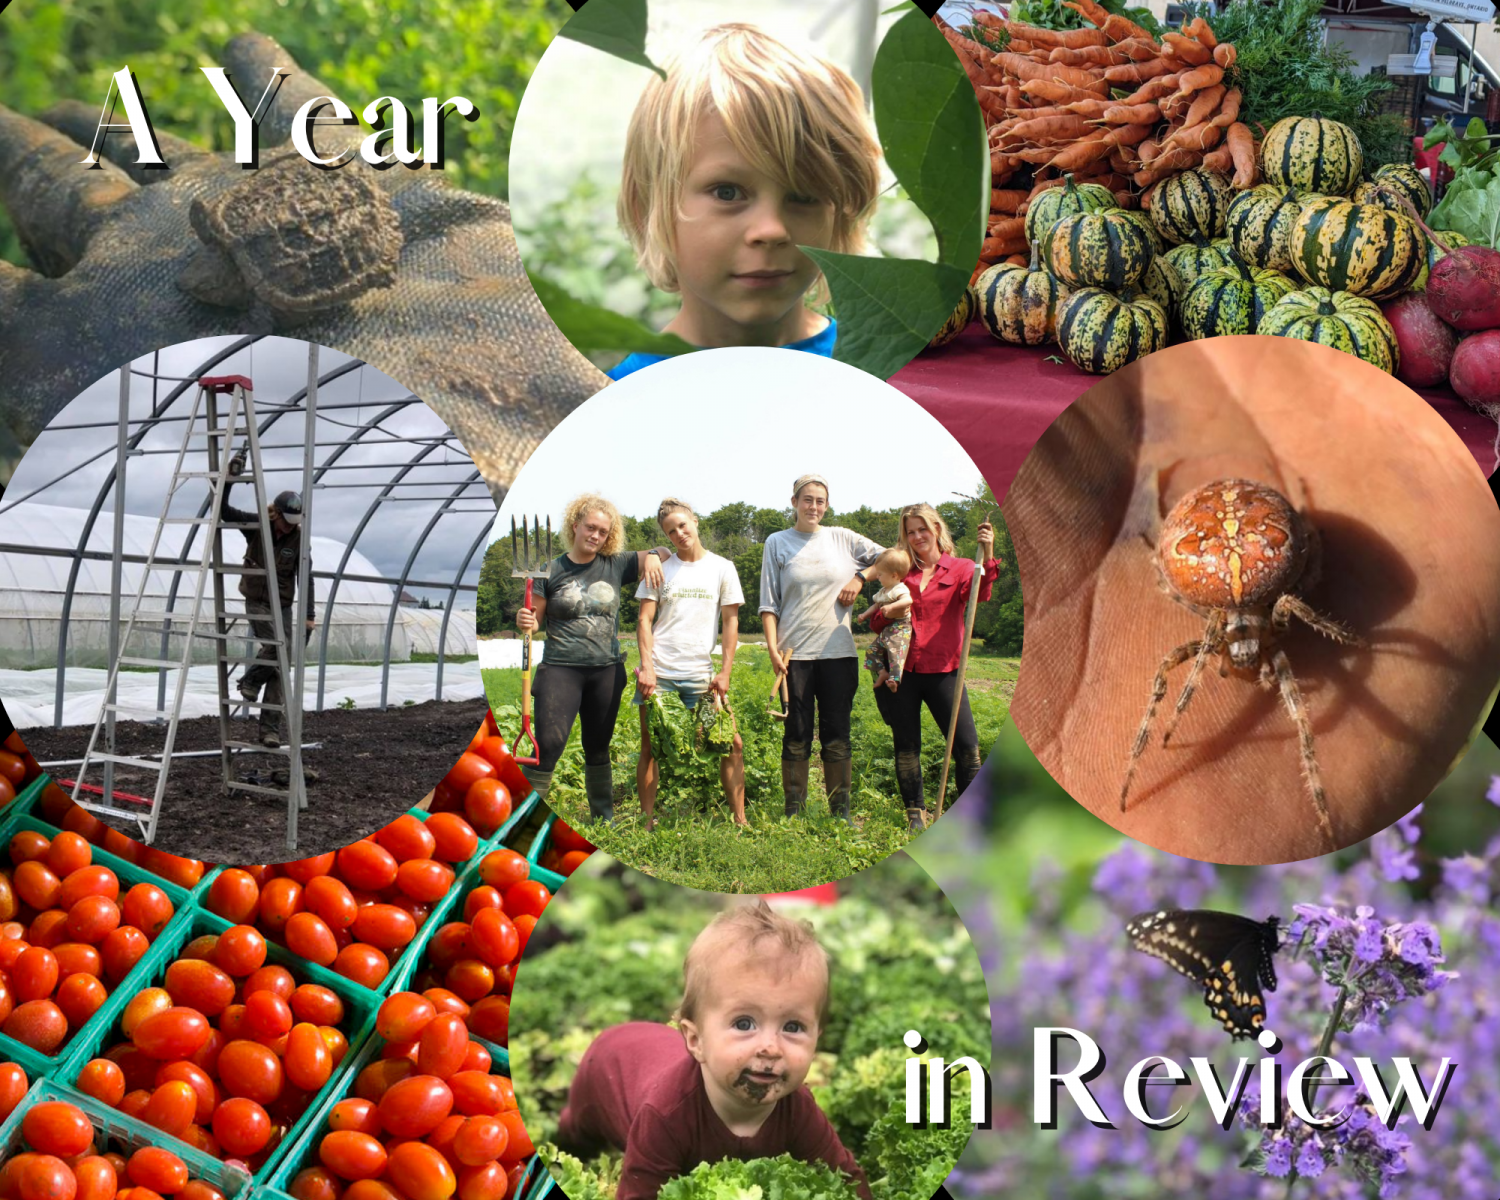 Previous Happening: Lettuce Rejoice! December 9, 2021- A Year in Review